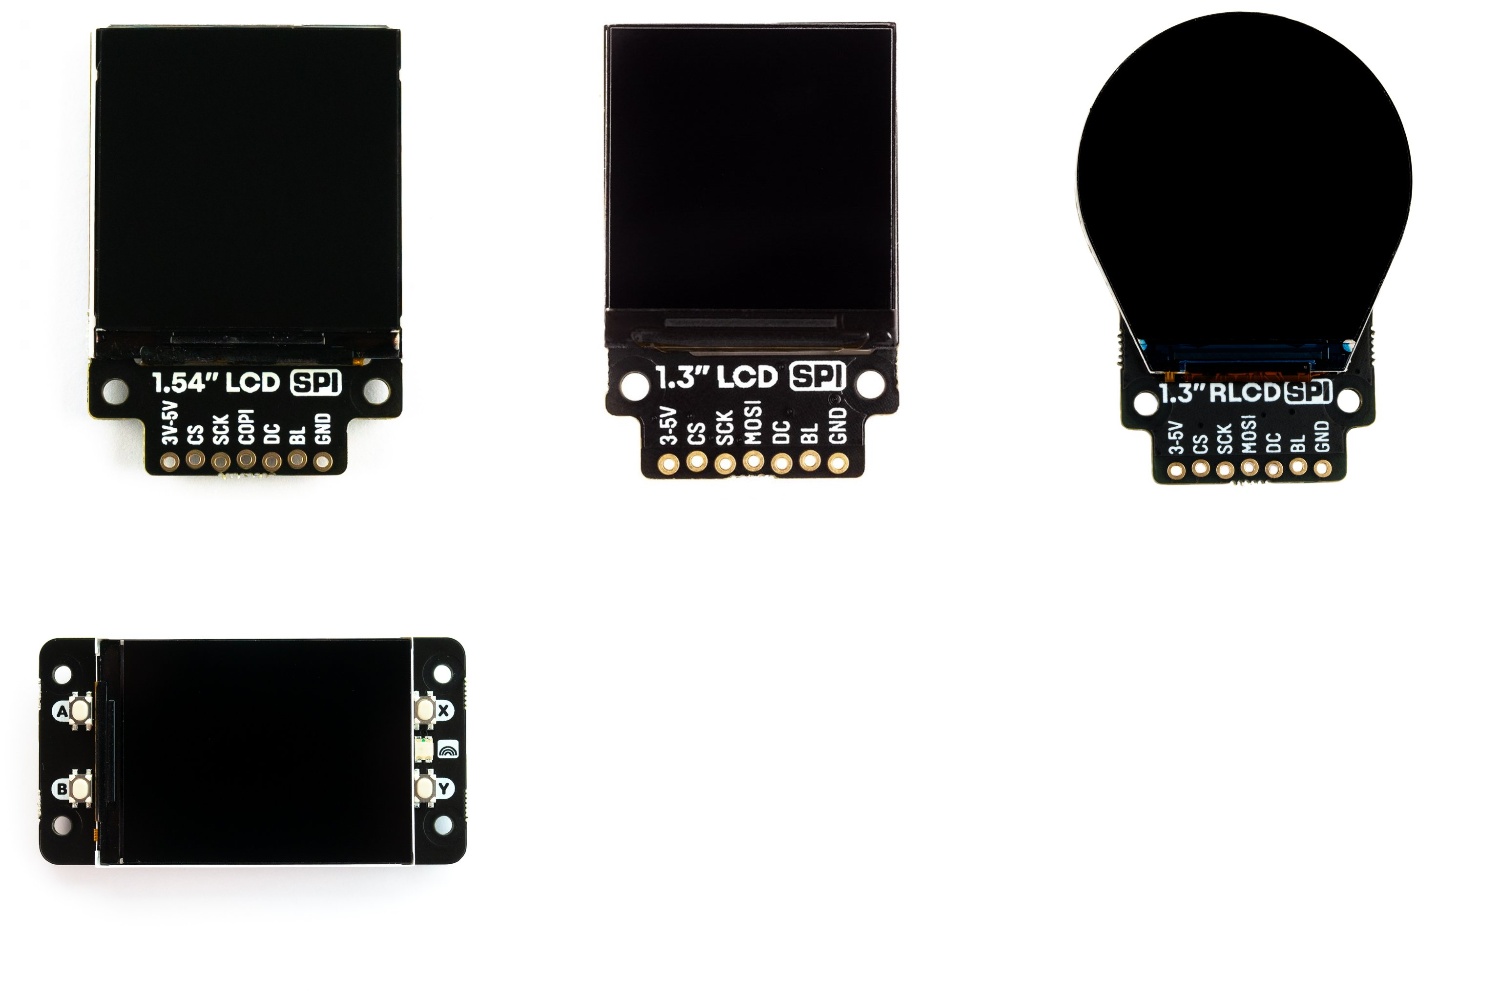 Photo showing four different Pimoroni ST7789-based products